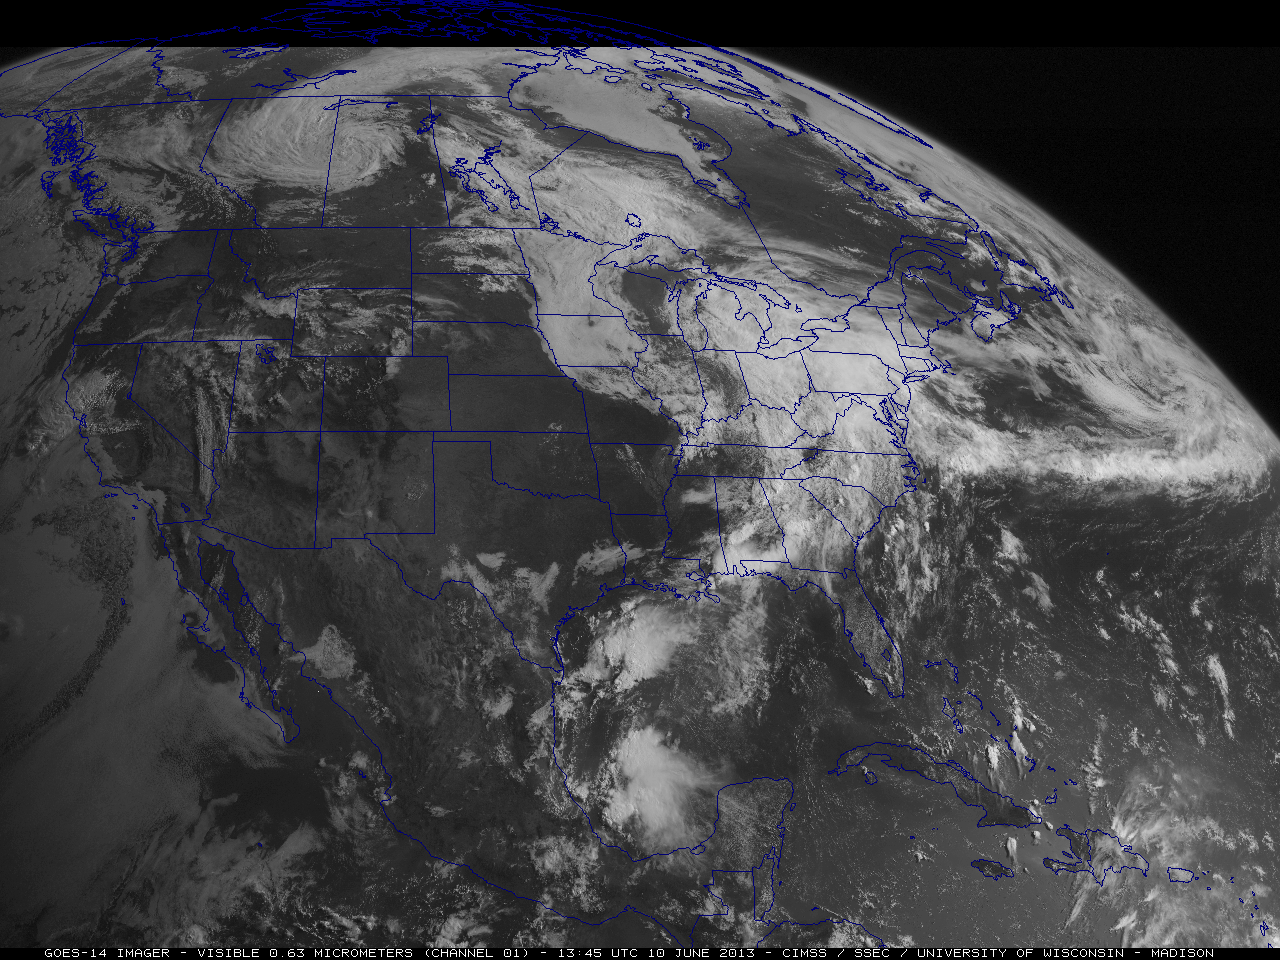 The transition from GOES-14 to GOES-13, as seen in 0.63 Âµm visible channel data from the Imager instrument